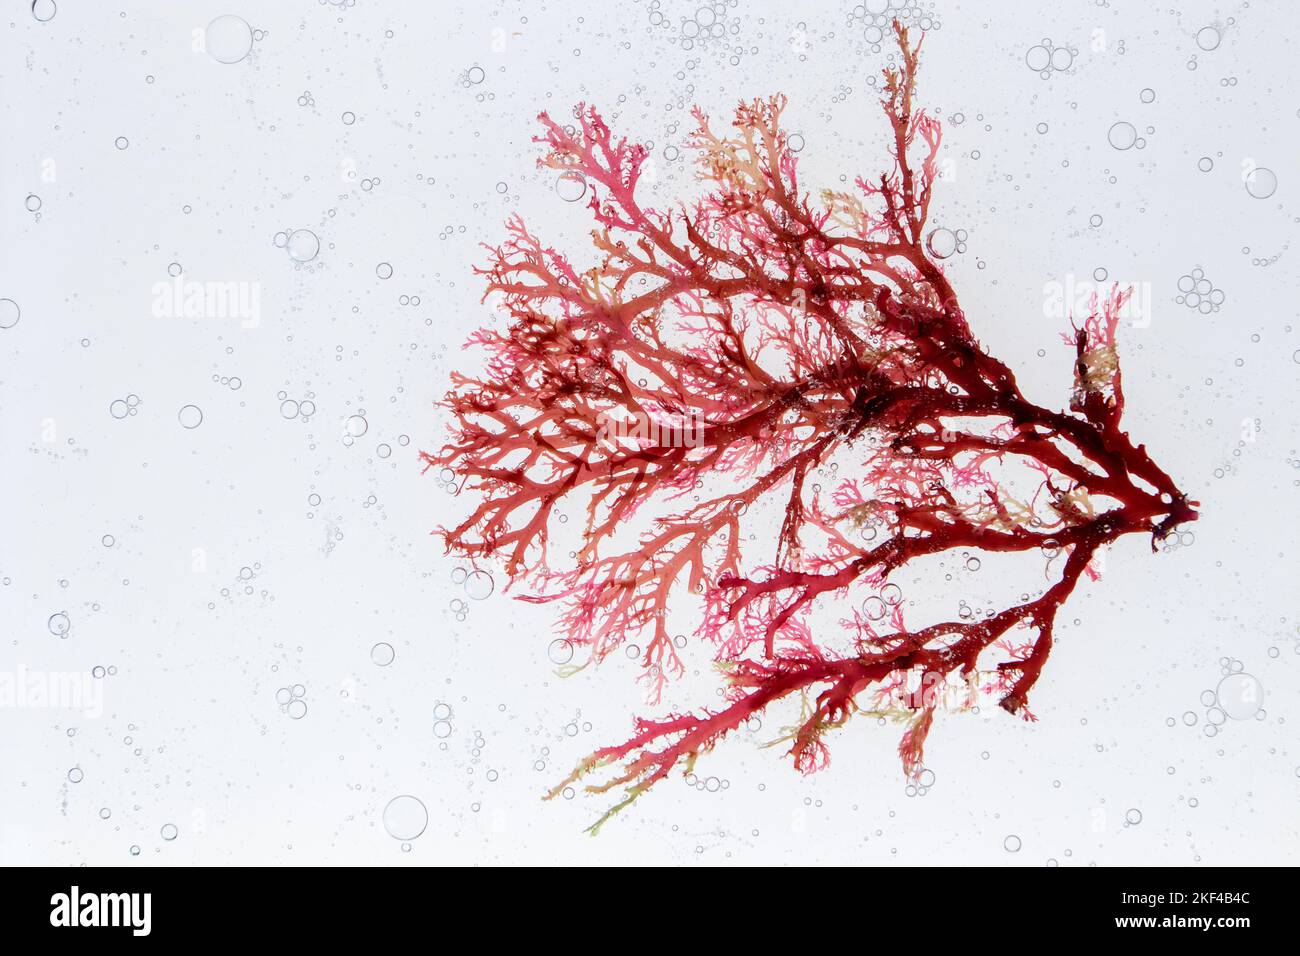 Red algae branch and air bubbles in the water. Skin care investigation concept. Spa wrapping ingredient. Stock Photo